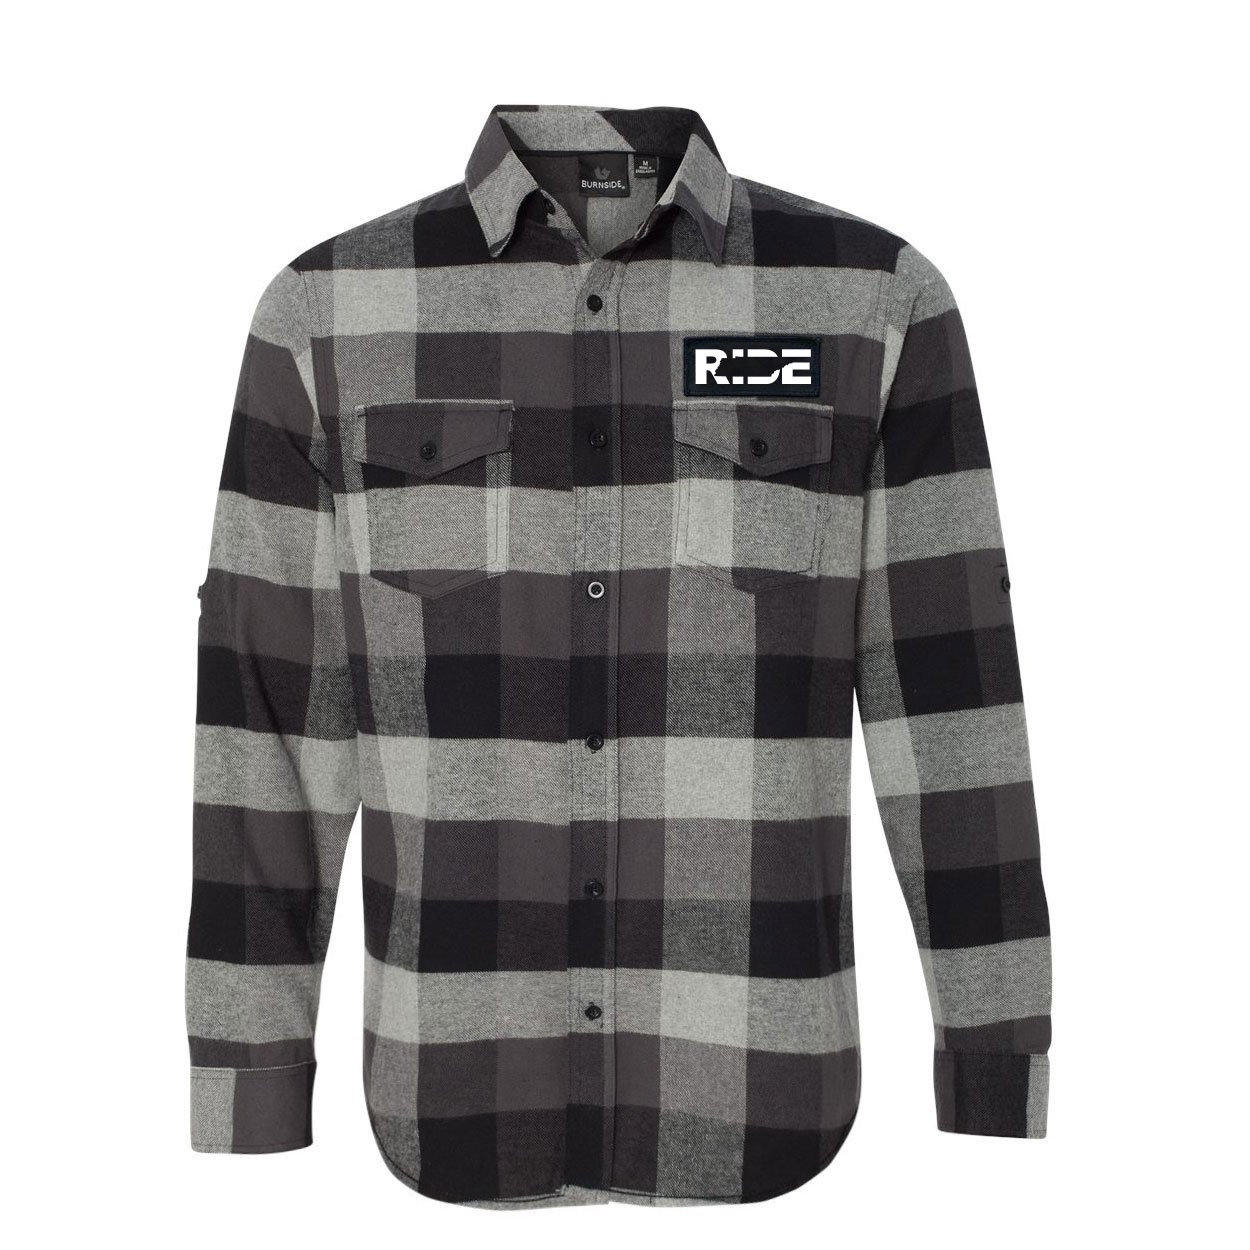 Ride Tennessee Classic Unisex Long Sleeve Woven Patch Flannel Shirt Black/Gray (White Logo)